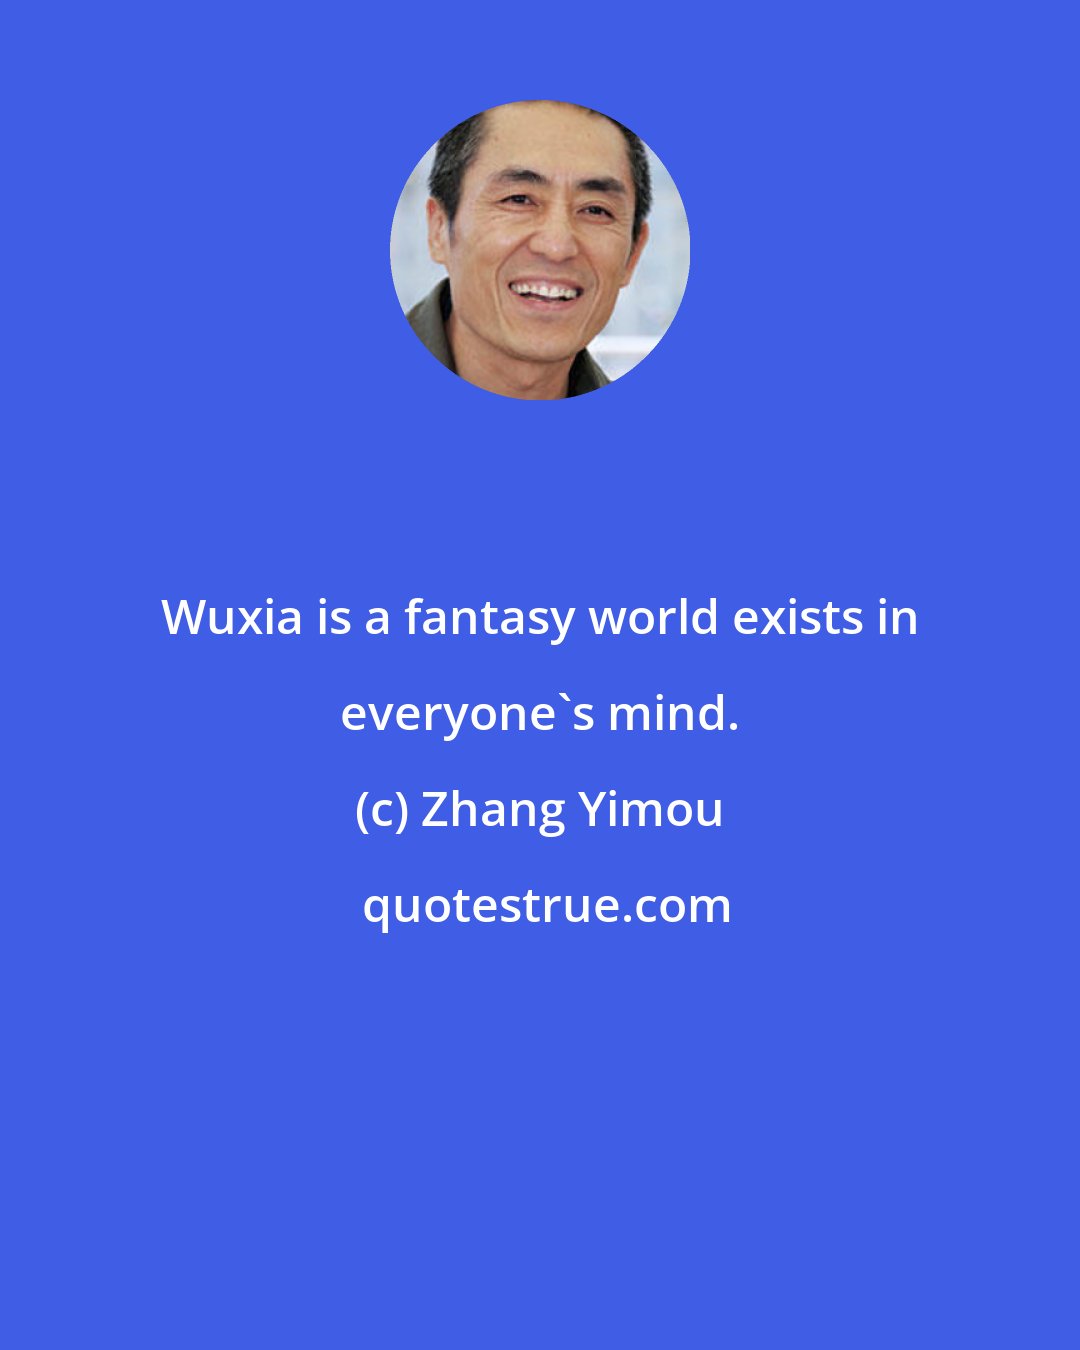 Zhang Yimou: Wuxia is a fantasy world exists in everyone's mind.